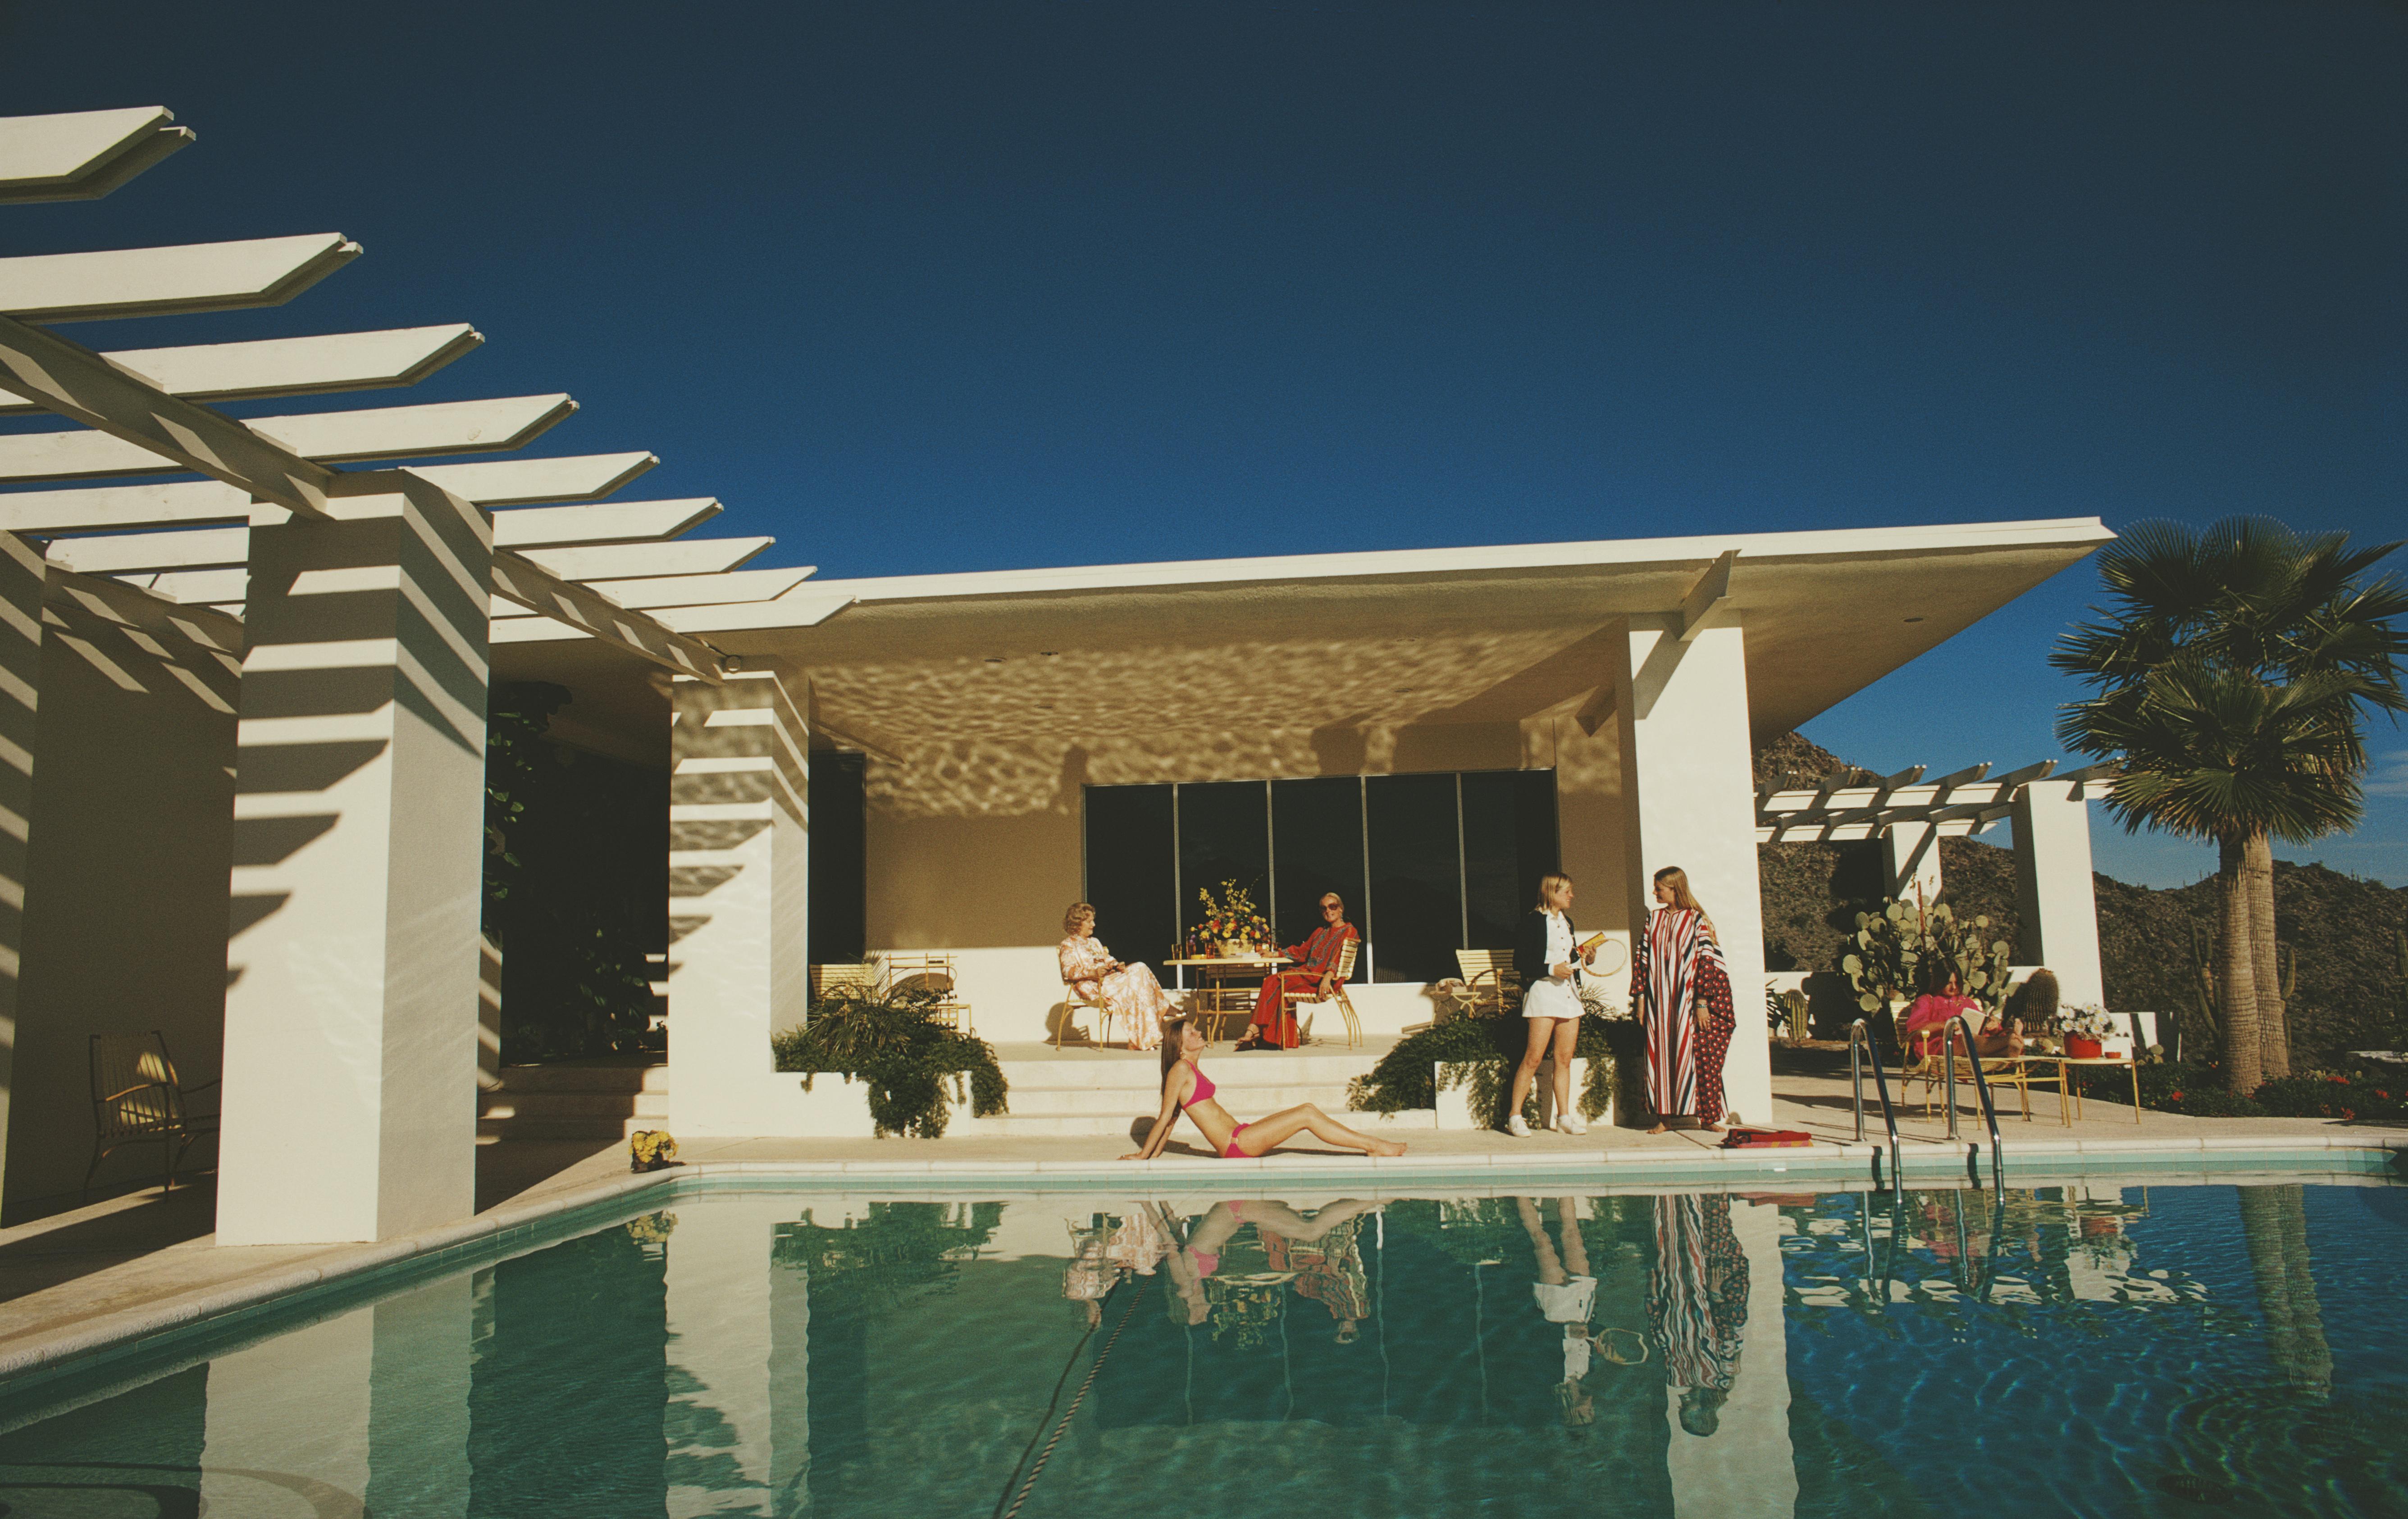 'Poolside In Arizona' 1973 Slim Aarons Limited Estate Edition

Guests by the pool at the home of Wayne Beal in Scottsdale, Arizona, January 1973. 

Produced from the original transparency
Certificate of authenticity supplied 
30x40 inches / 76 x 102